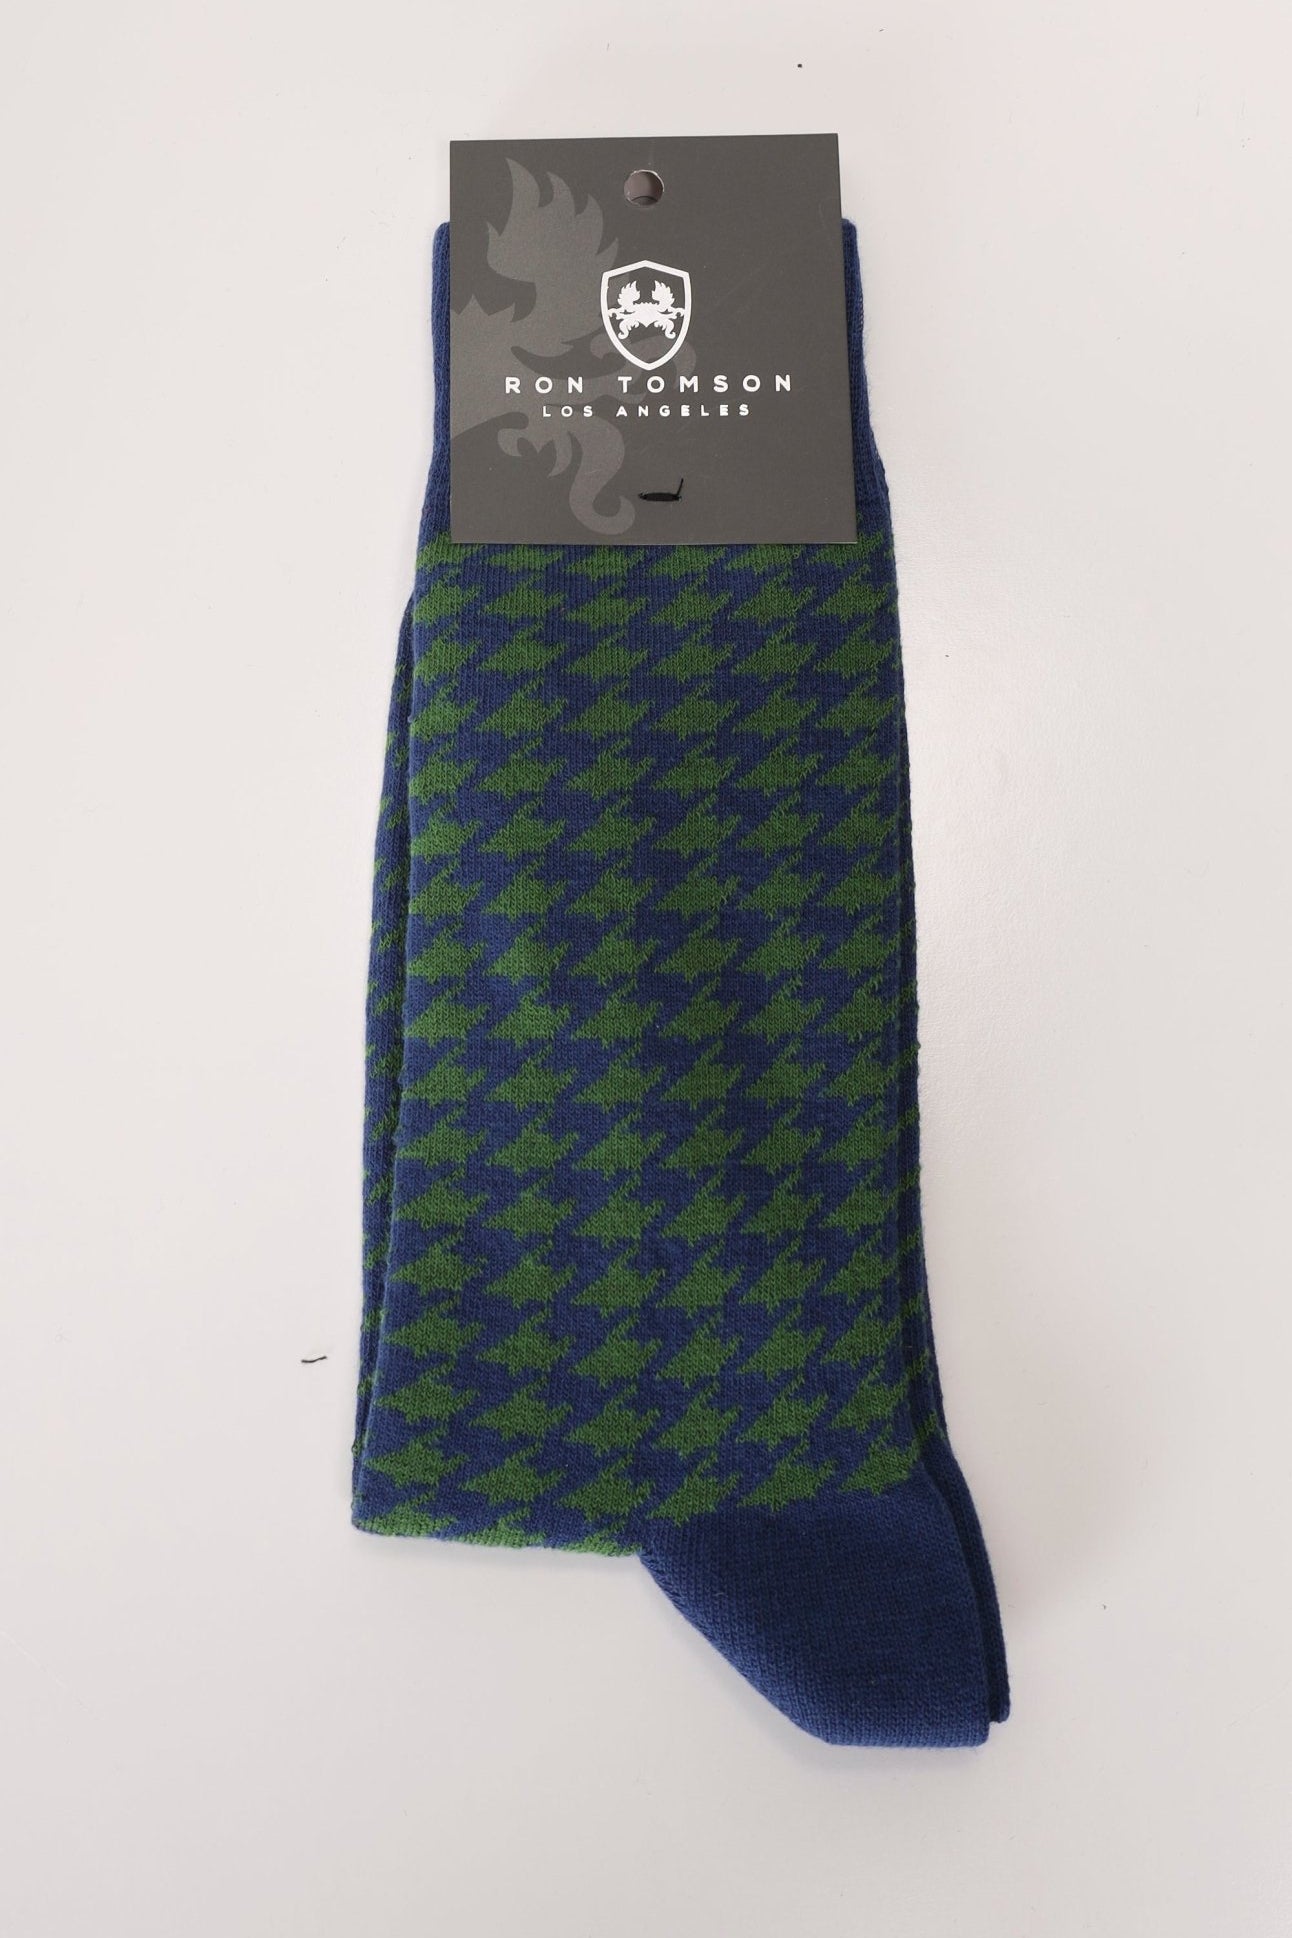 Green Houndstooth Sock - Ron Tomson